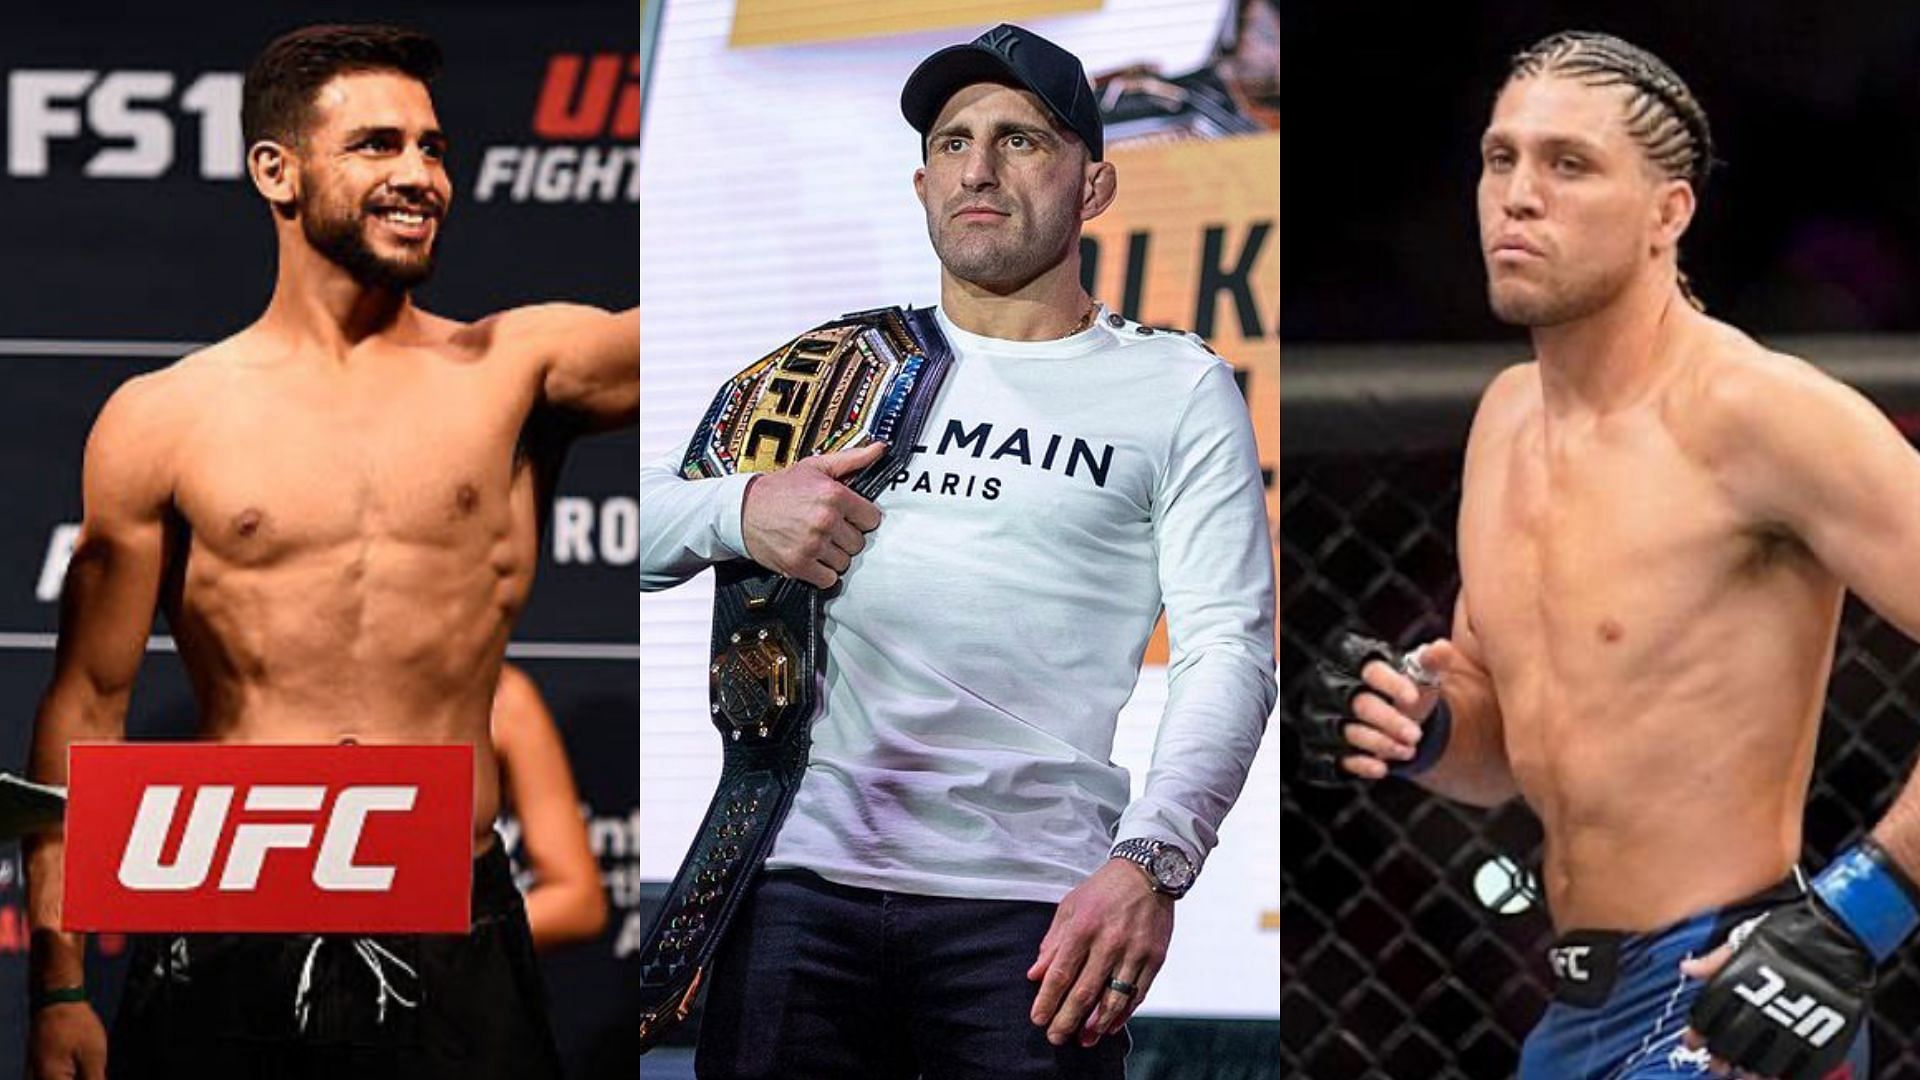 From left to right: Yair Rodriguez, Alexander Volkanovski, and Brian Ortega [ Images Courtesy: @panteraufc, @alexvolkanovski, and @briantcity on Instagram]